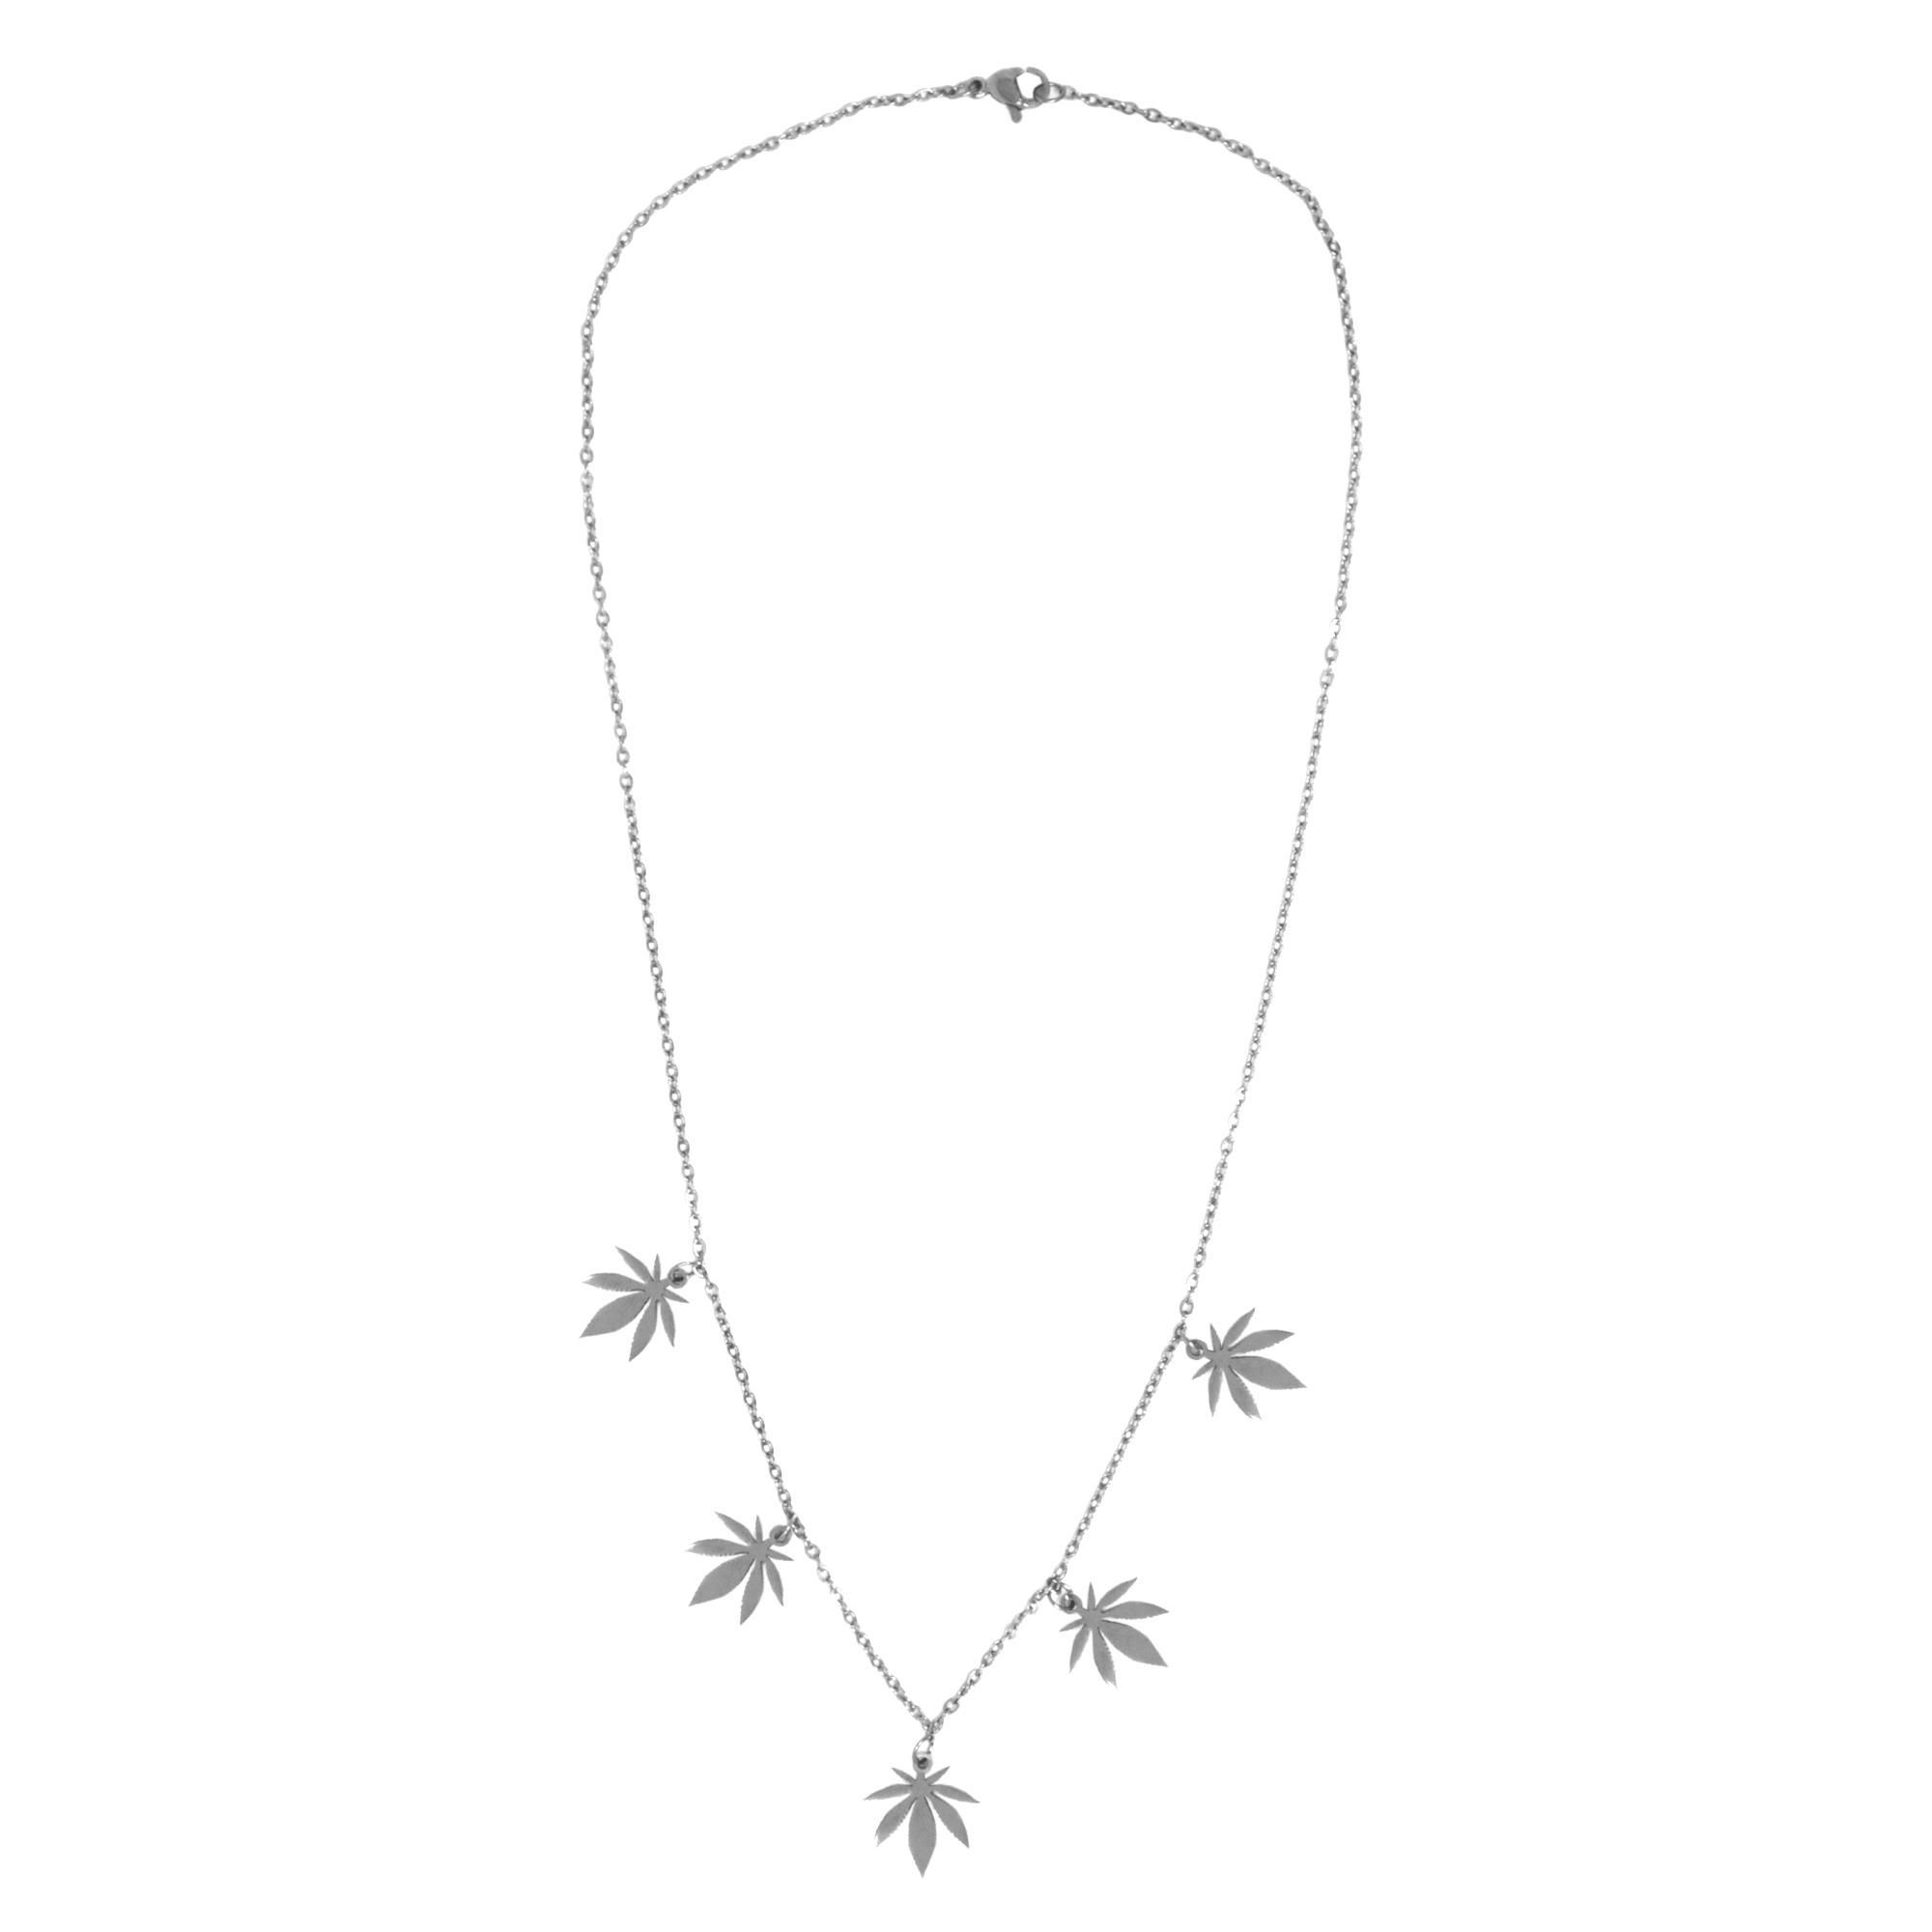 LITTLE LEAF STACKERS SILVER NECKLACE